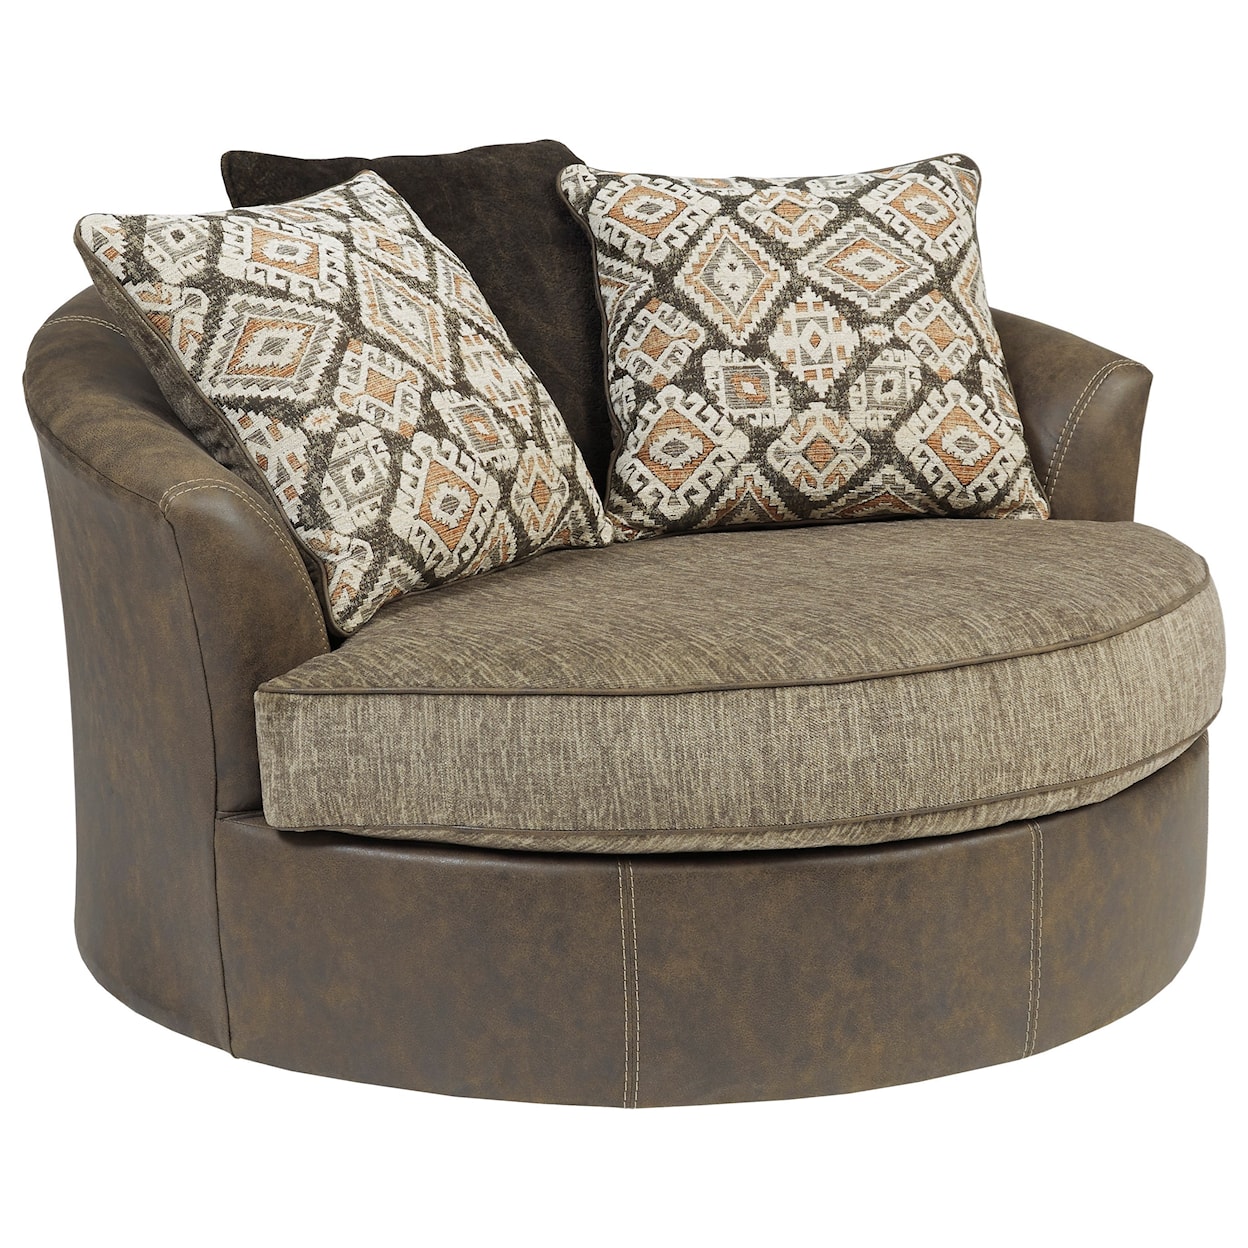 JB King Abalone Oversized Swivel Accent Chair